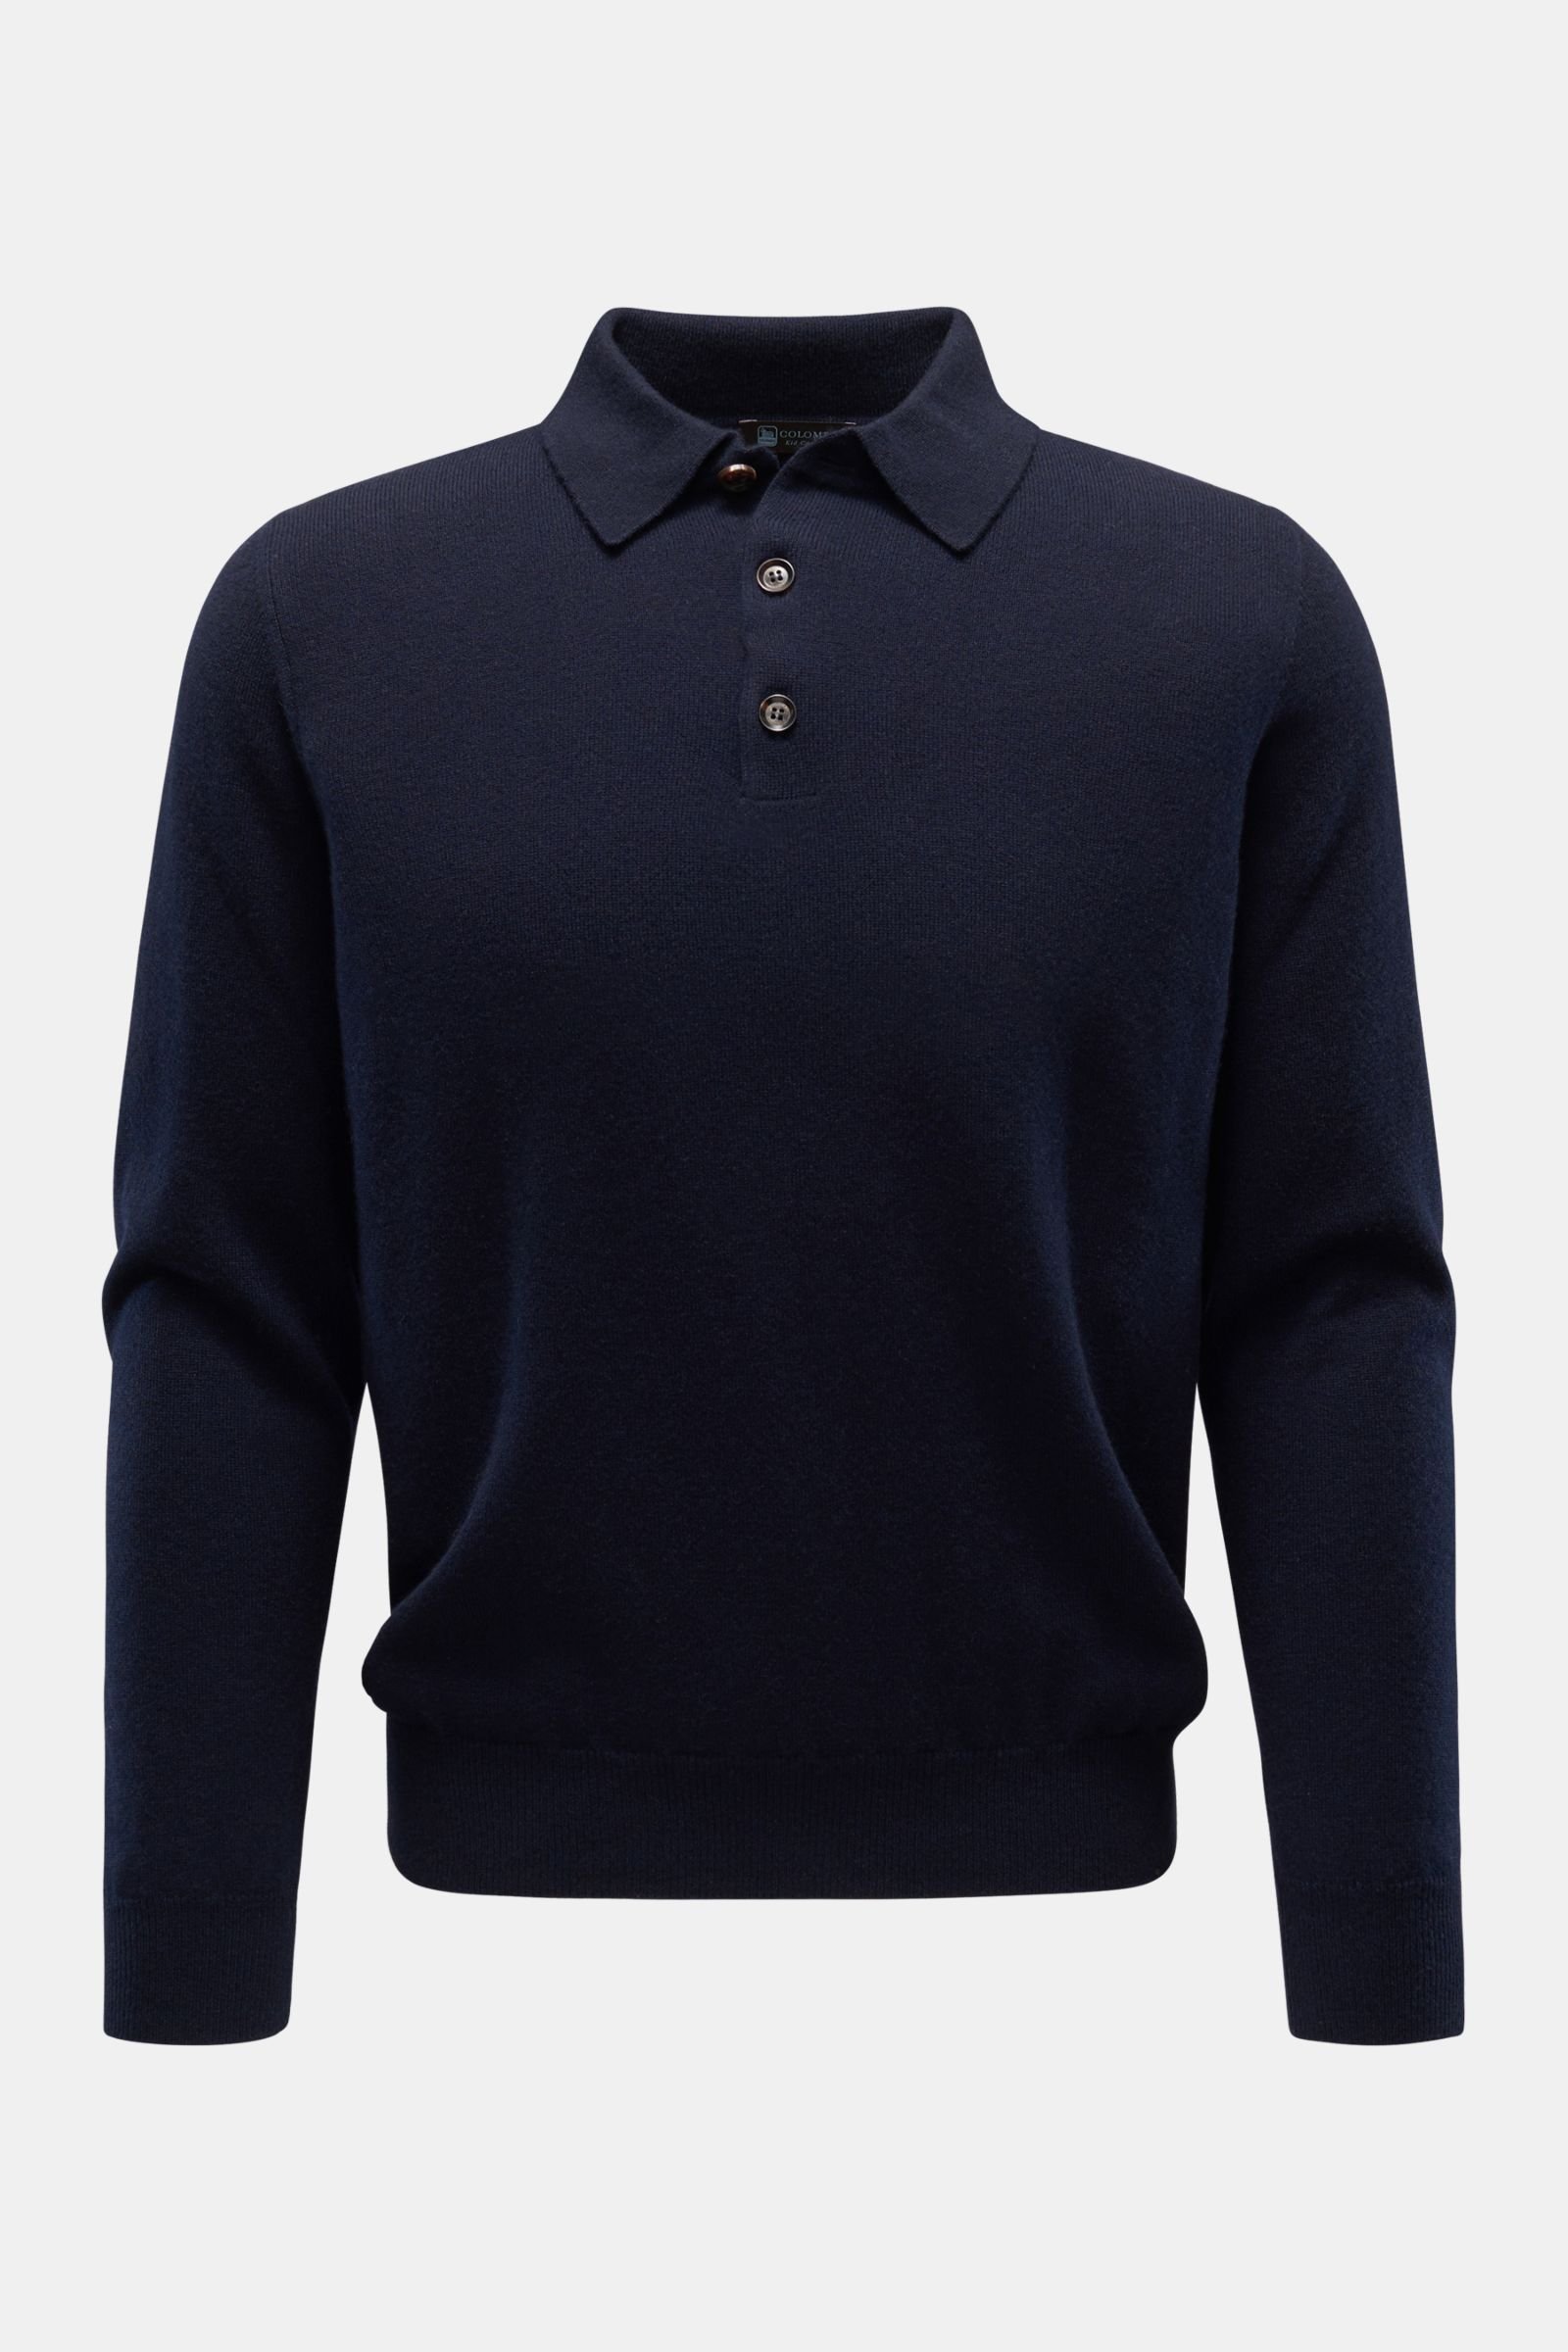 Baby-Cashmere Strickpolo navy